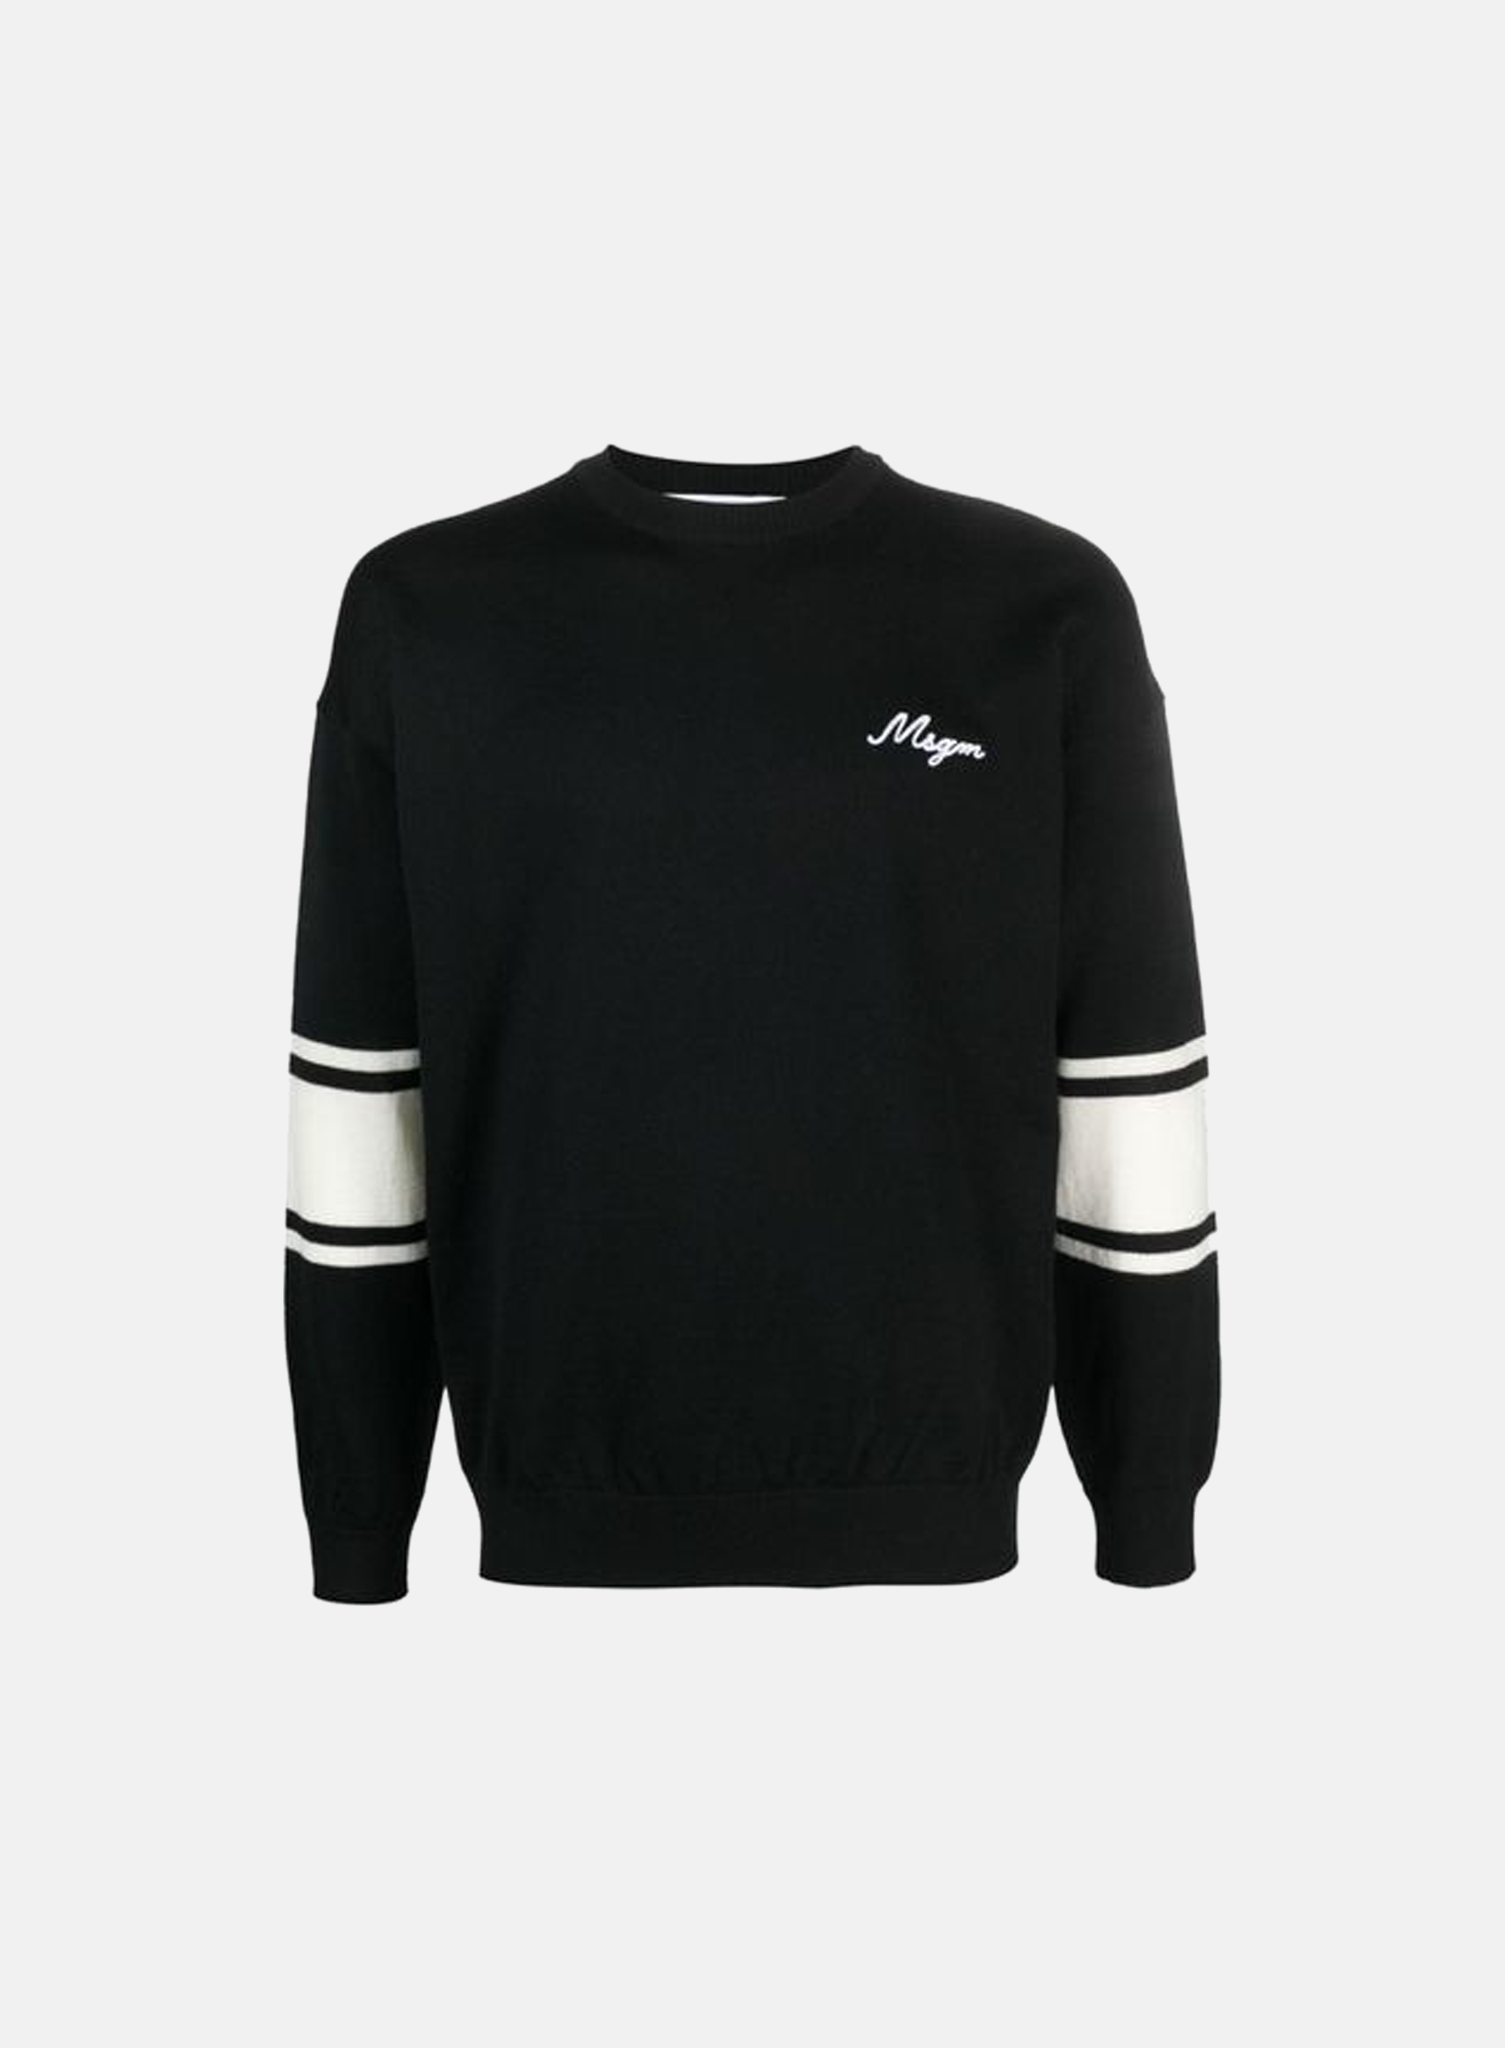 MSGM Embroidered Logo Pullover - Hympala Store 